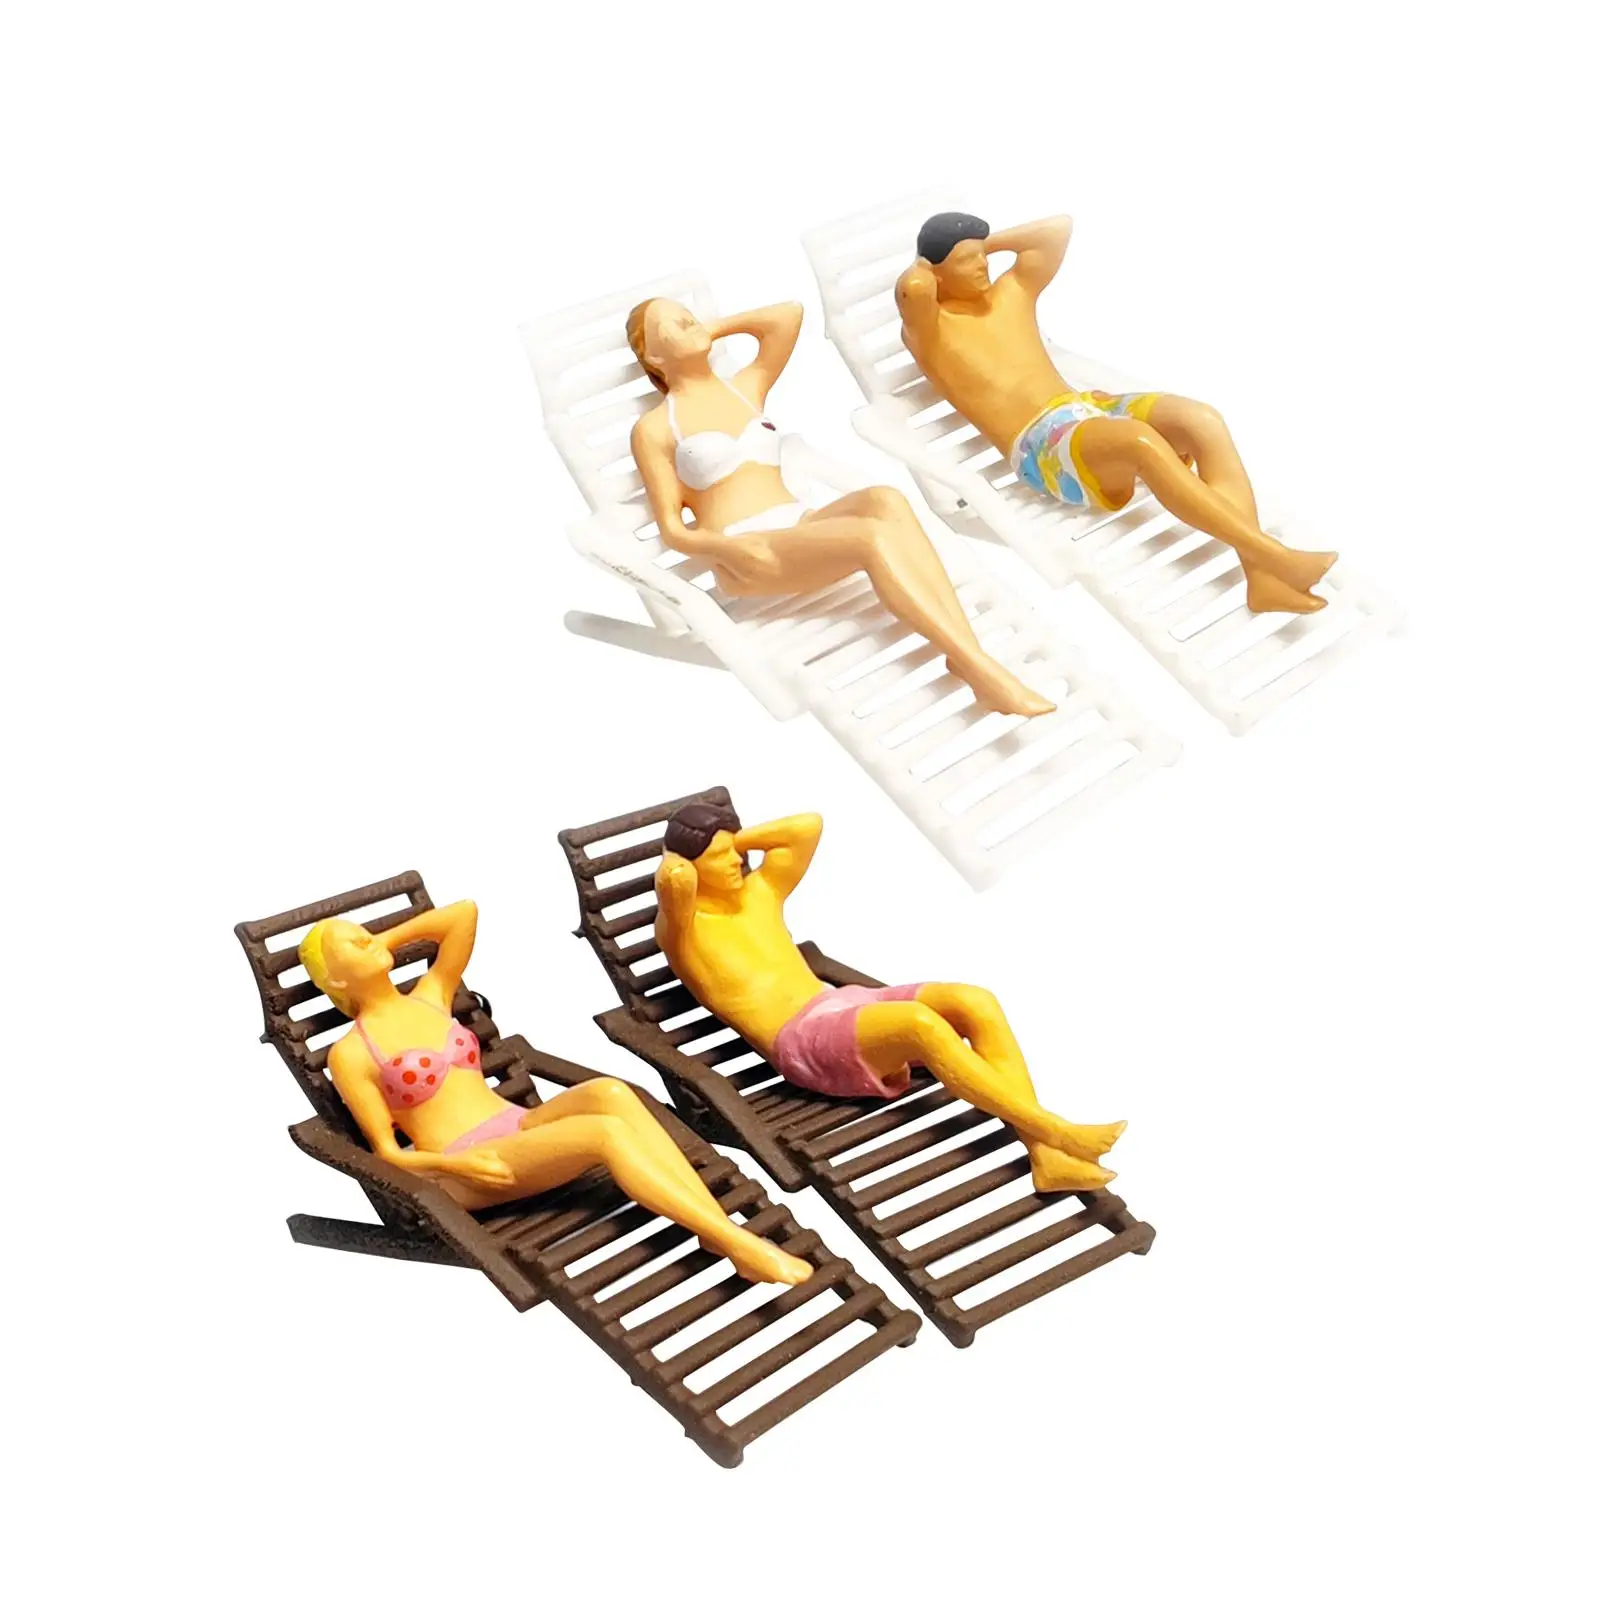 Realistic 1/64 Scale People Figurines Set Miniature People Model Deck Chair Model for DIY Scene Diorama Dollhouse Layout Decor